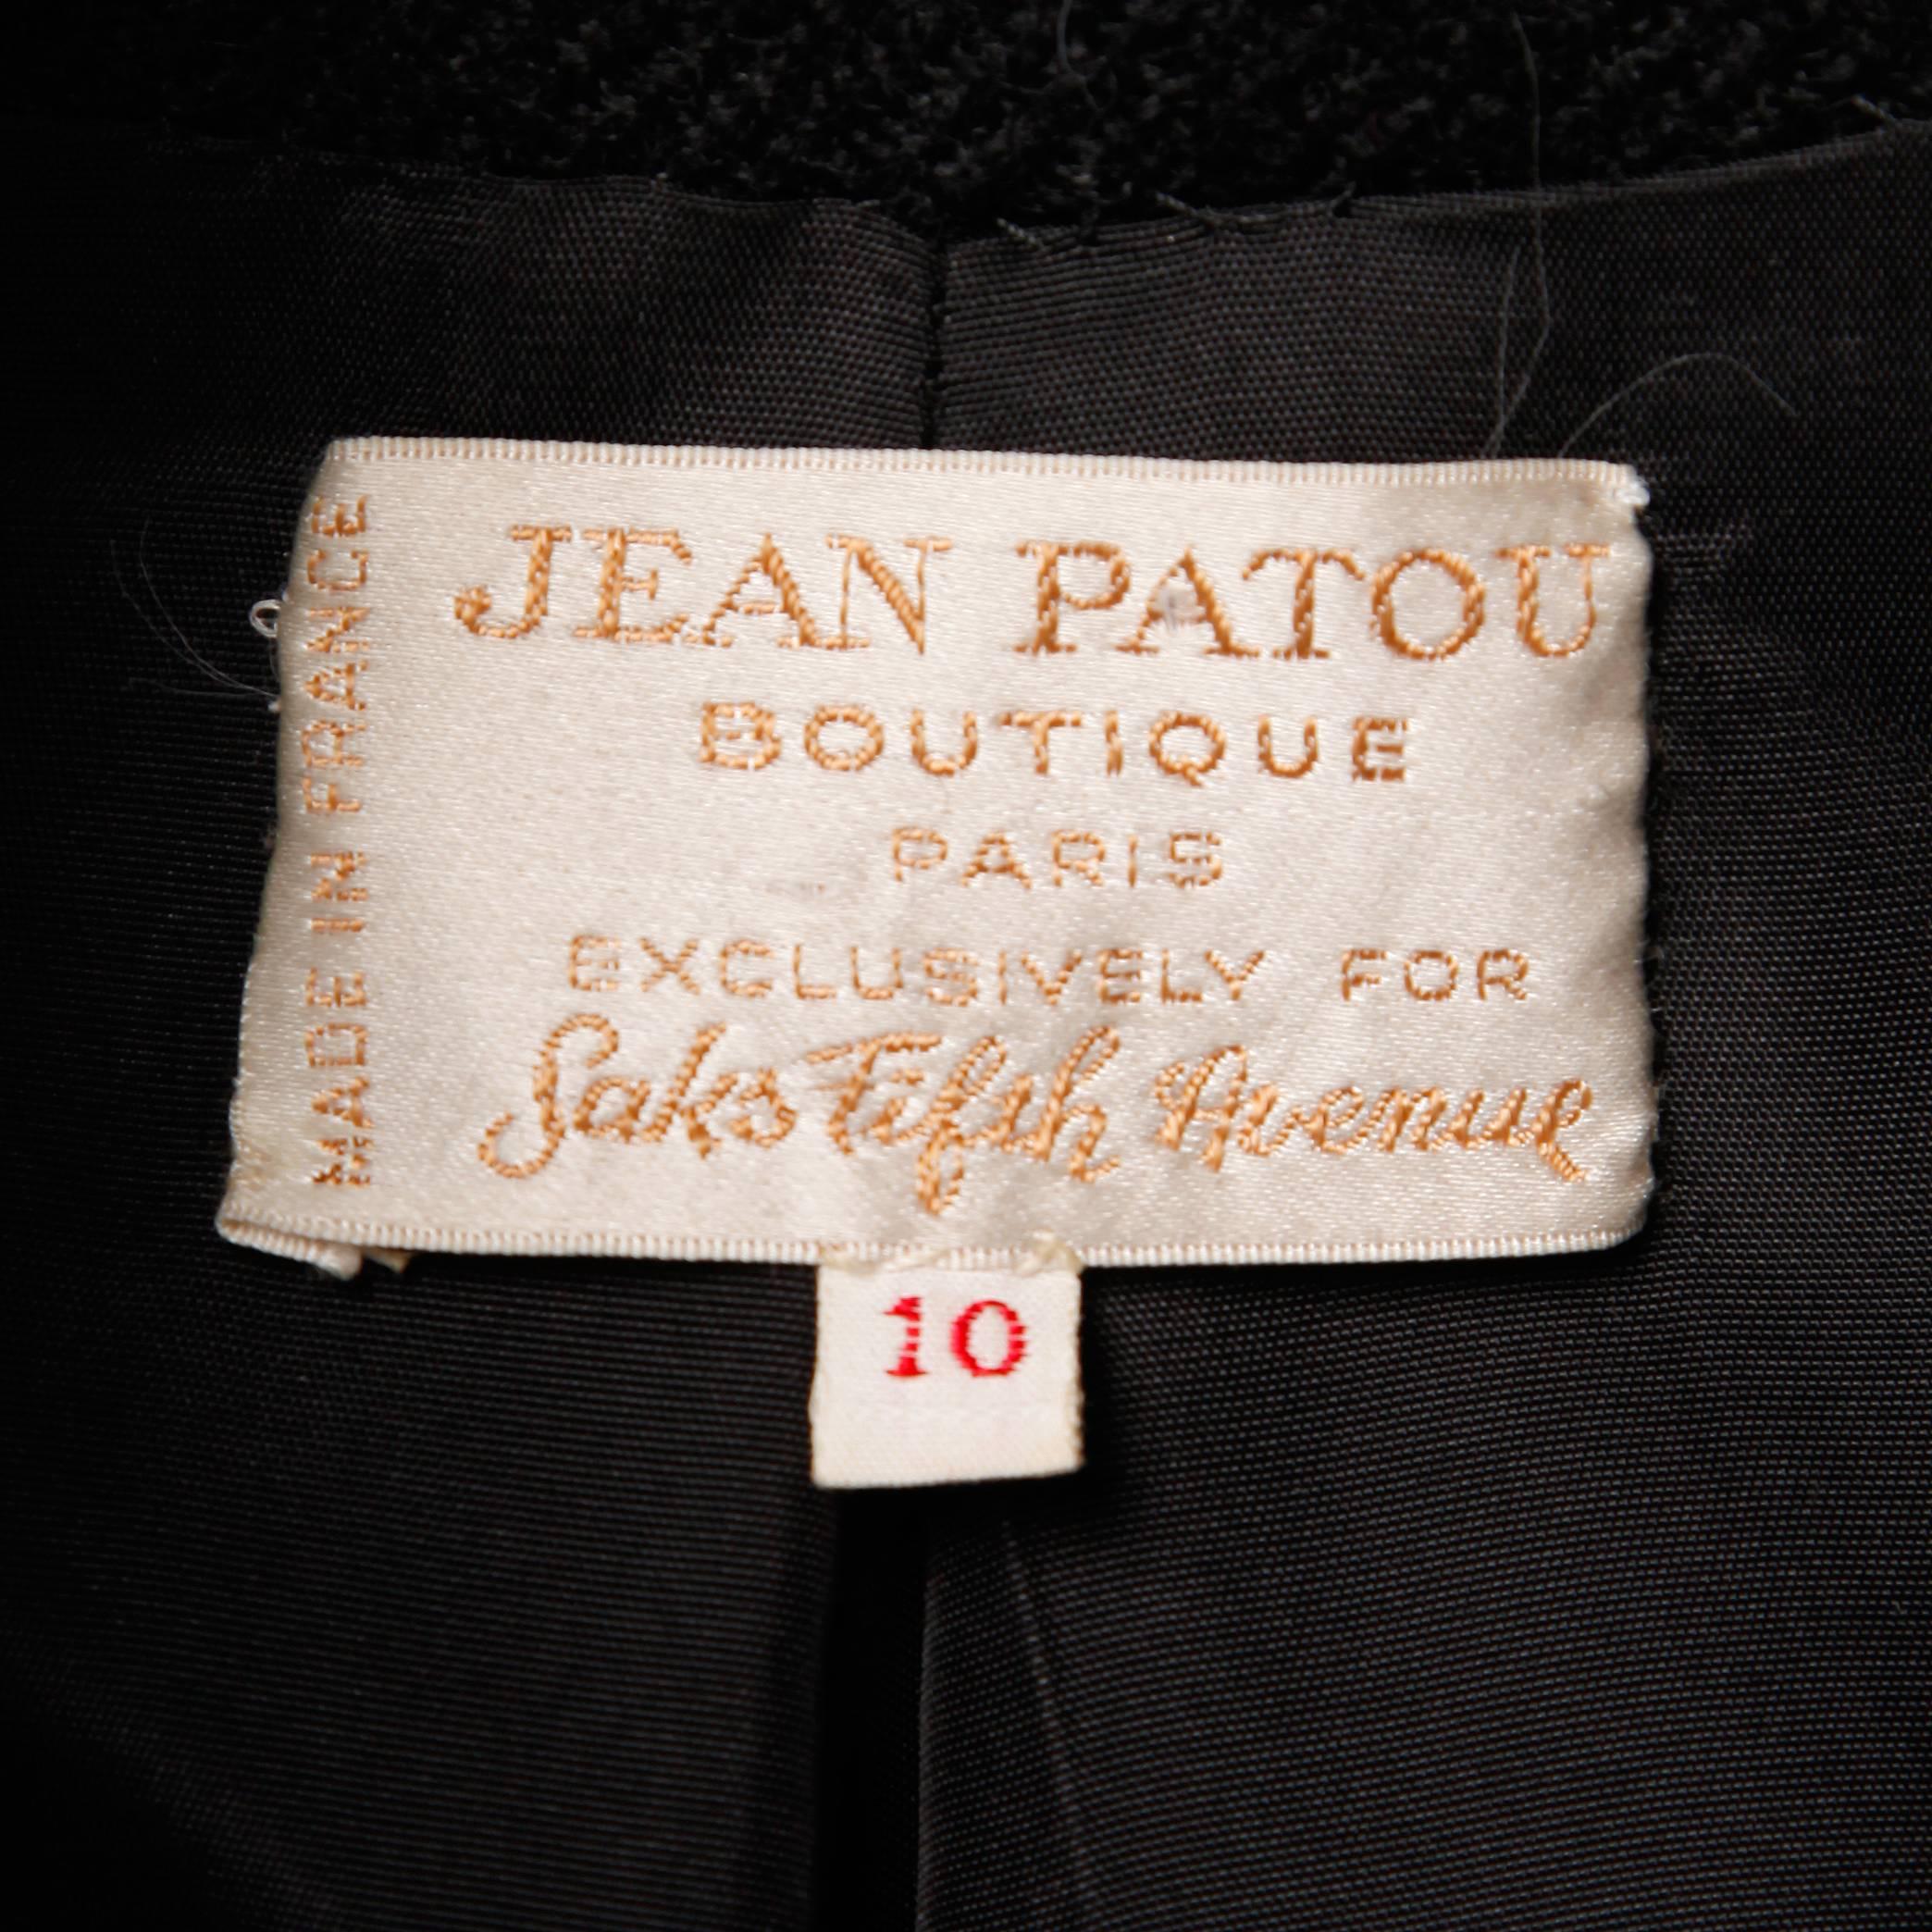 Gorgeous vintage black wool coat by Jean Patou! Extraordinary construction with notched lapels and pop up collar. Heavy weight wool.

Details: 

Fully Lined
Side Slit Pockets
Button Front Closure
Marked Size: 10
Estimated Size: